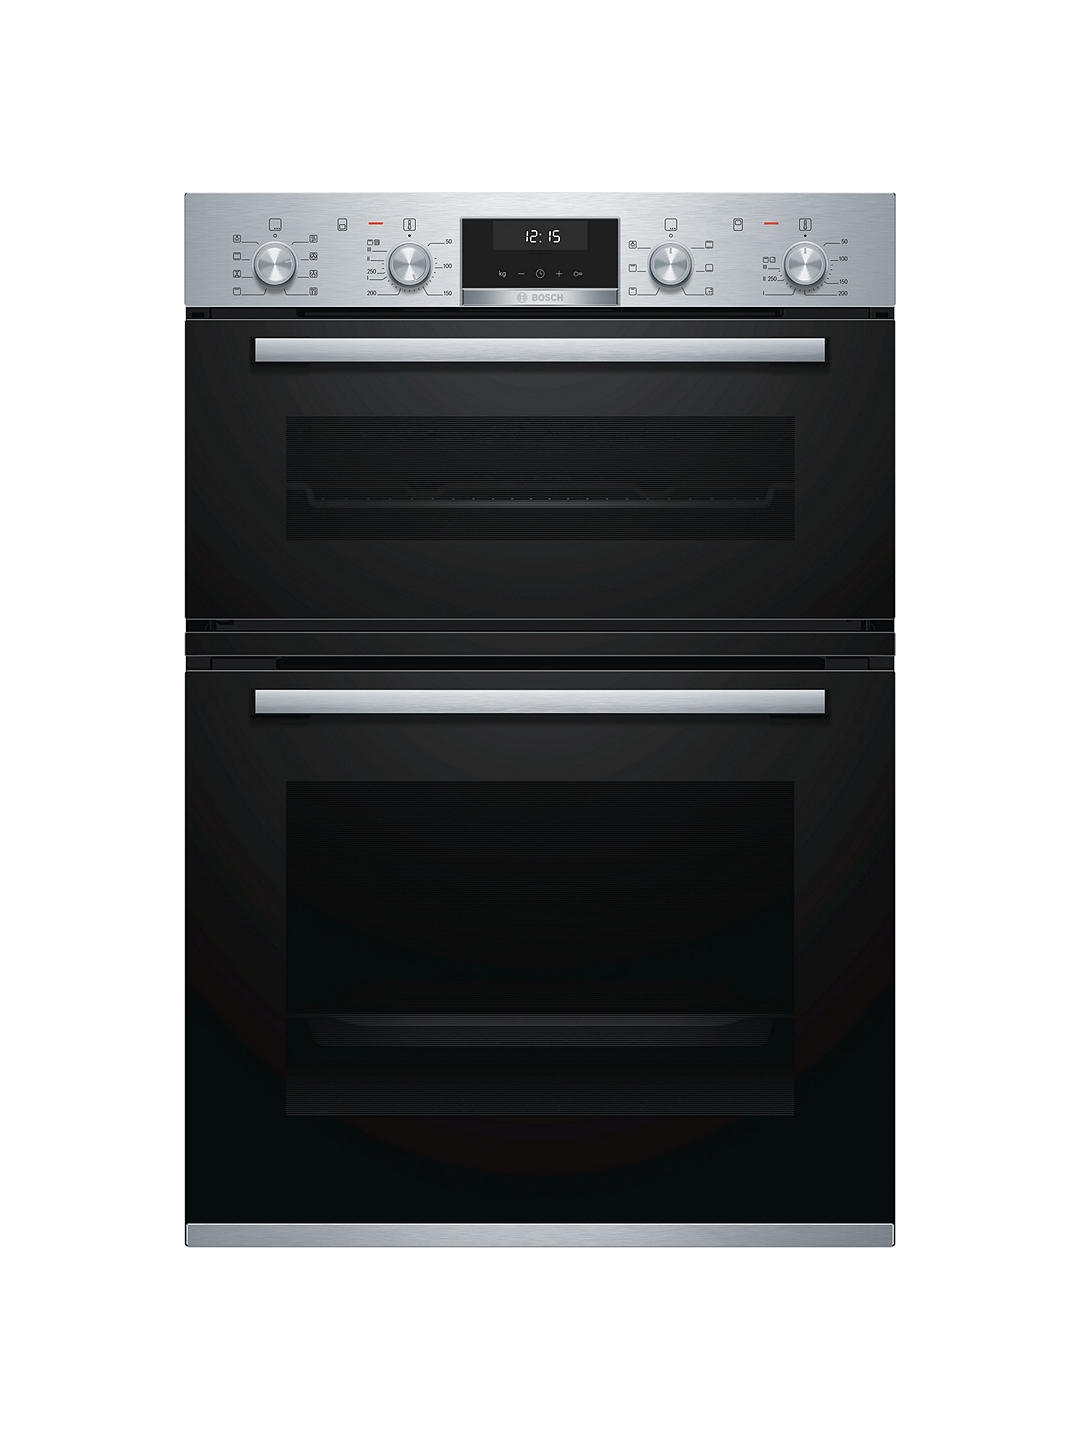 Bosch MBA5350S0B Built-In Double Oven Stainless Steel